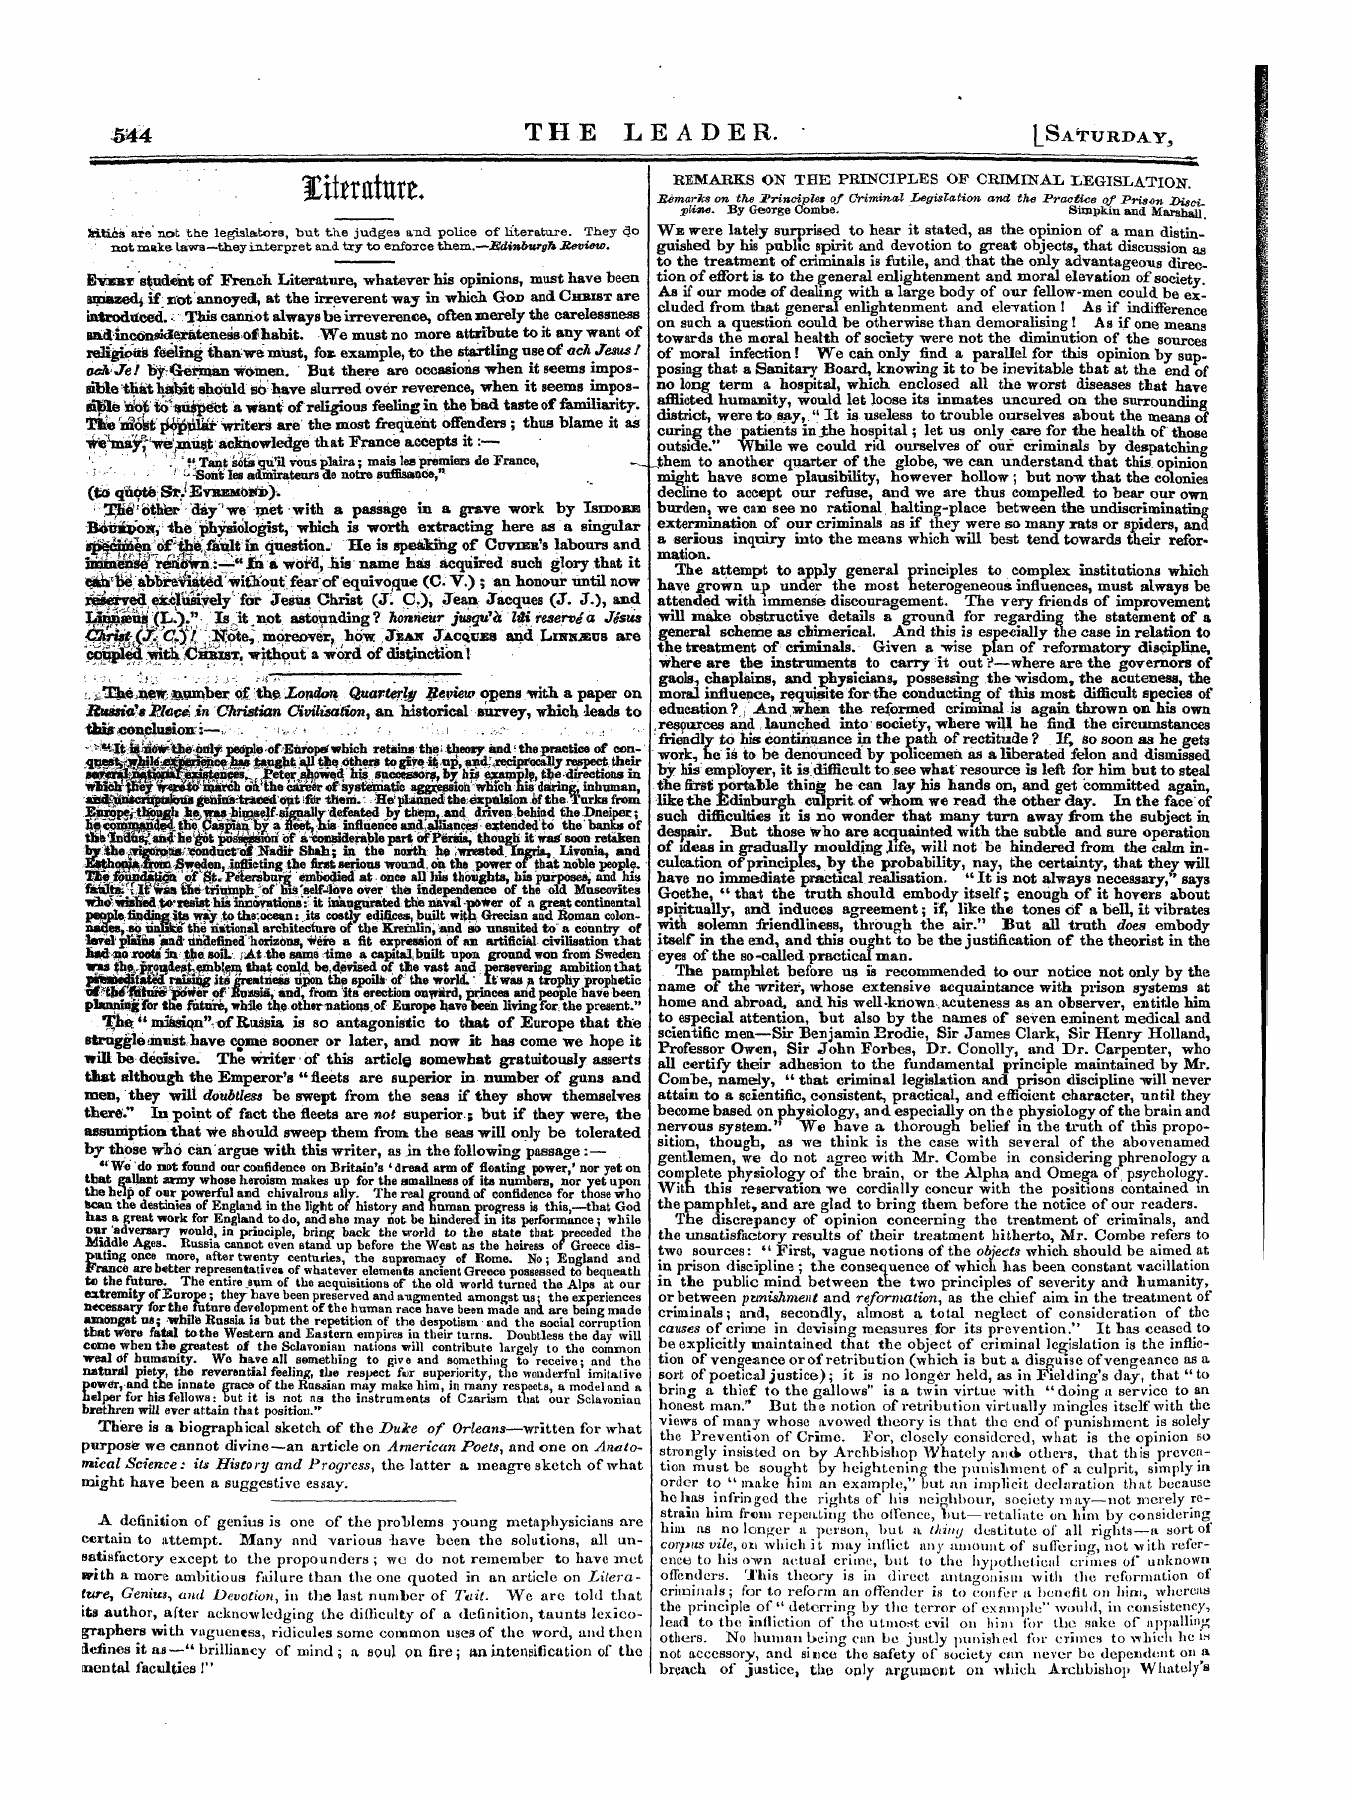 Leader (1850-1860): jS F Y, 1st edition: 16